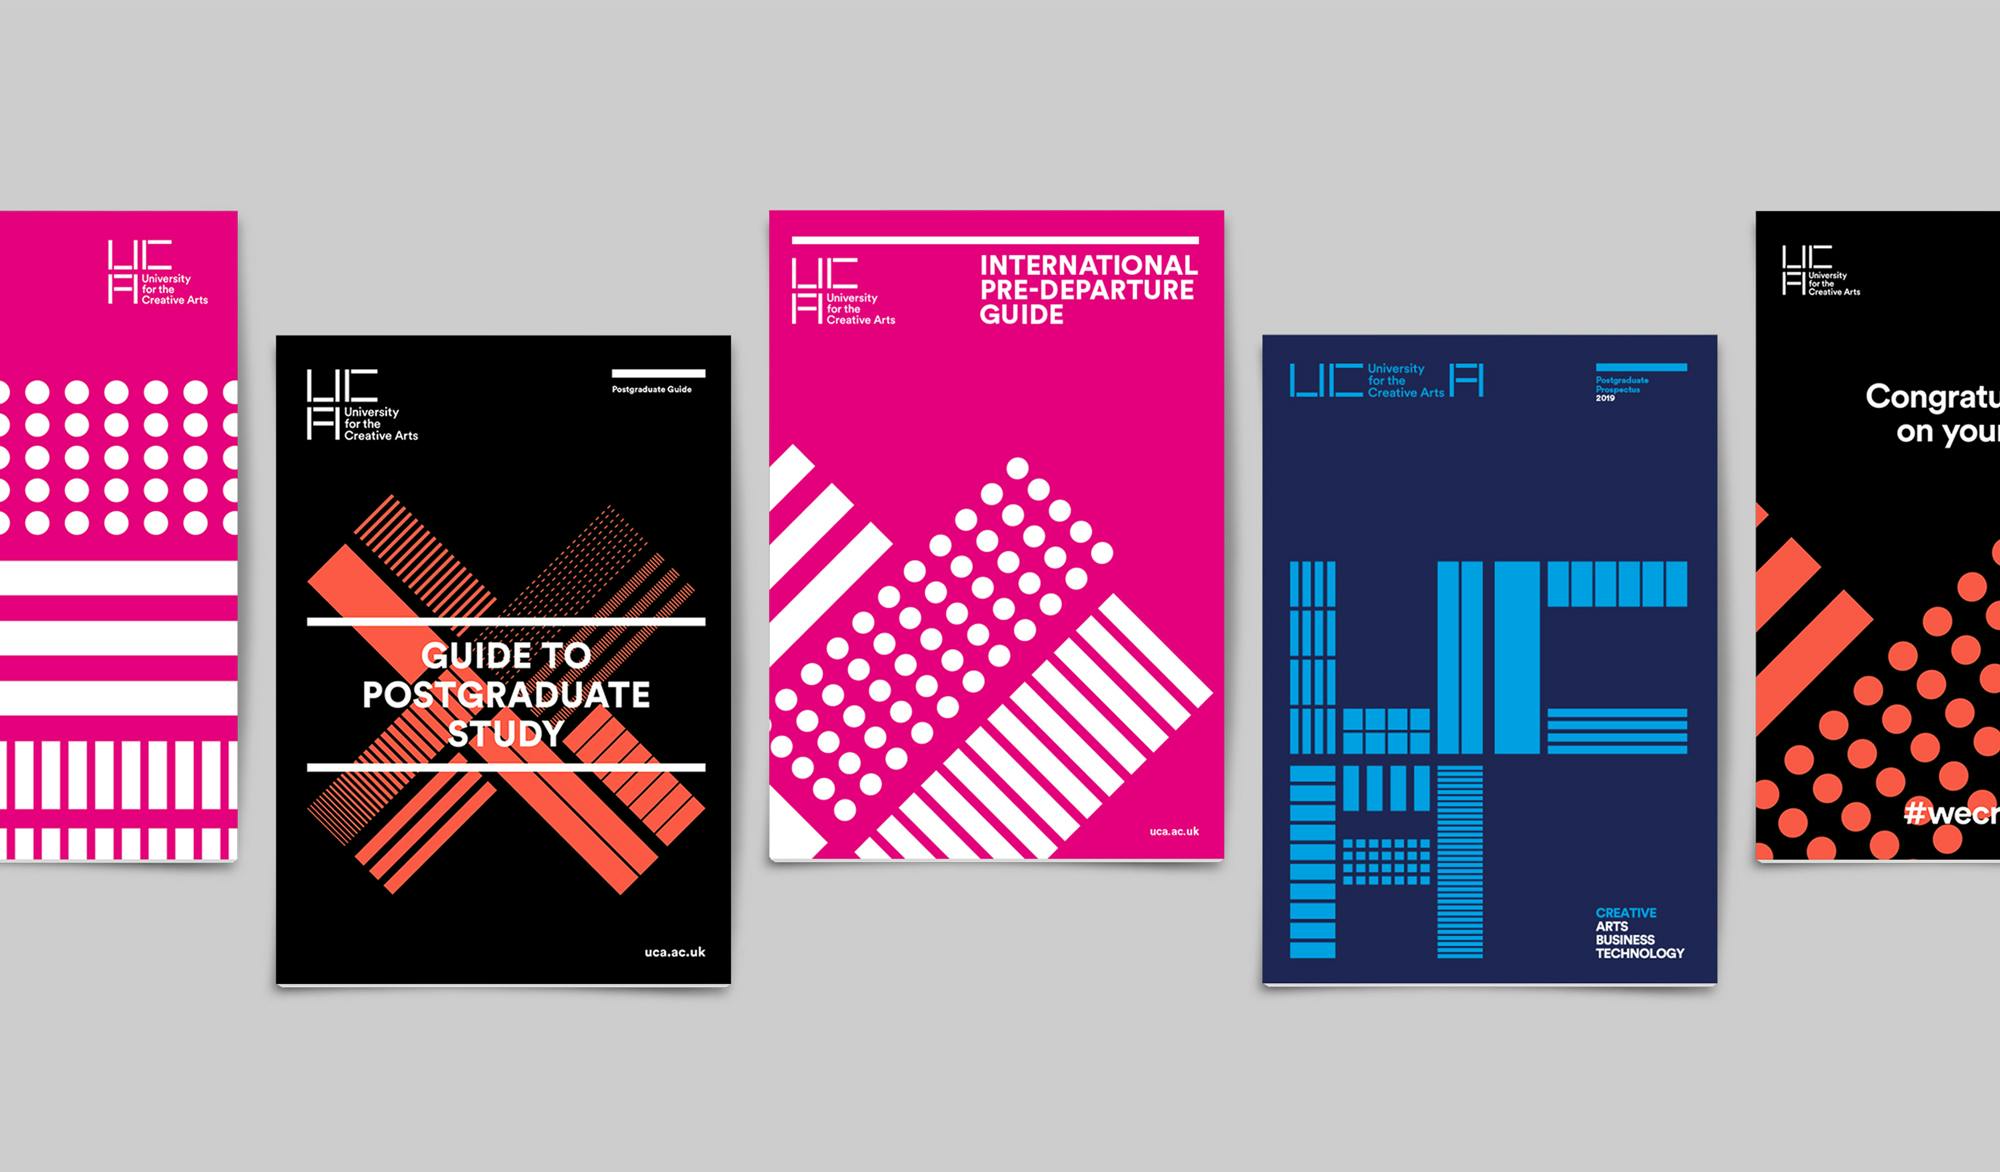 Various promotional materials for the University for the Creative Arts, designed by Extract Studio